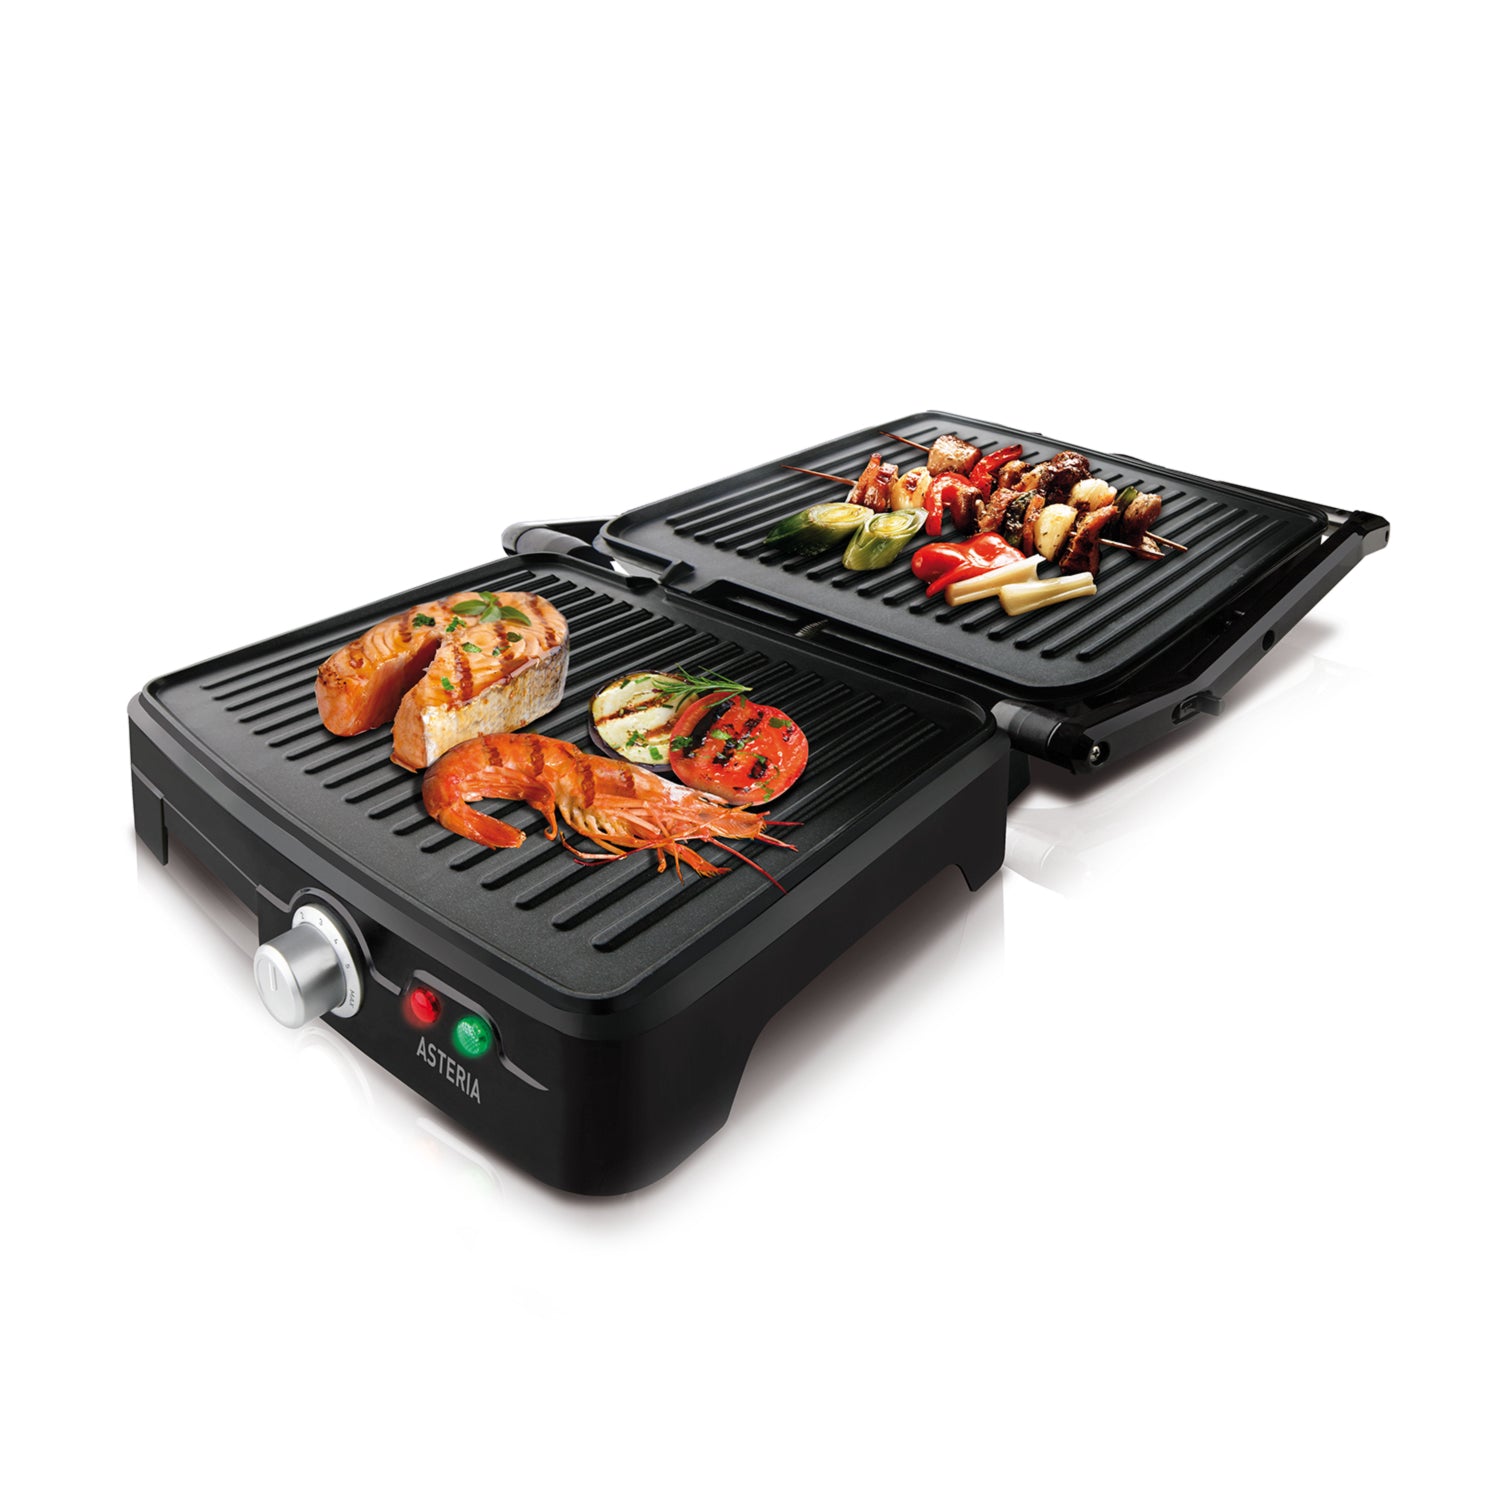 Taurus Asteria Complete 2-in-1 Electric Grill 2000W, Opening to